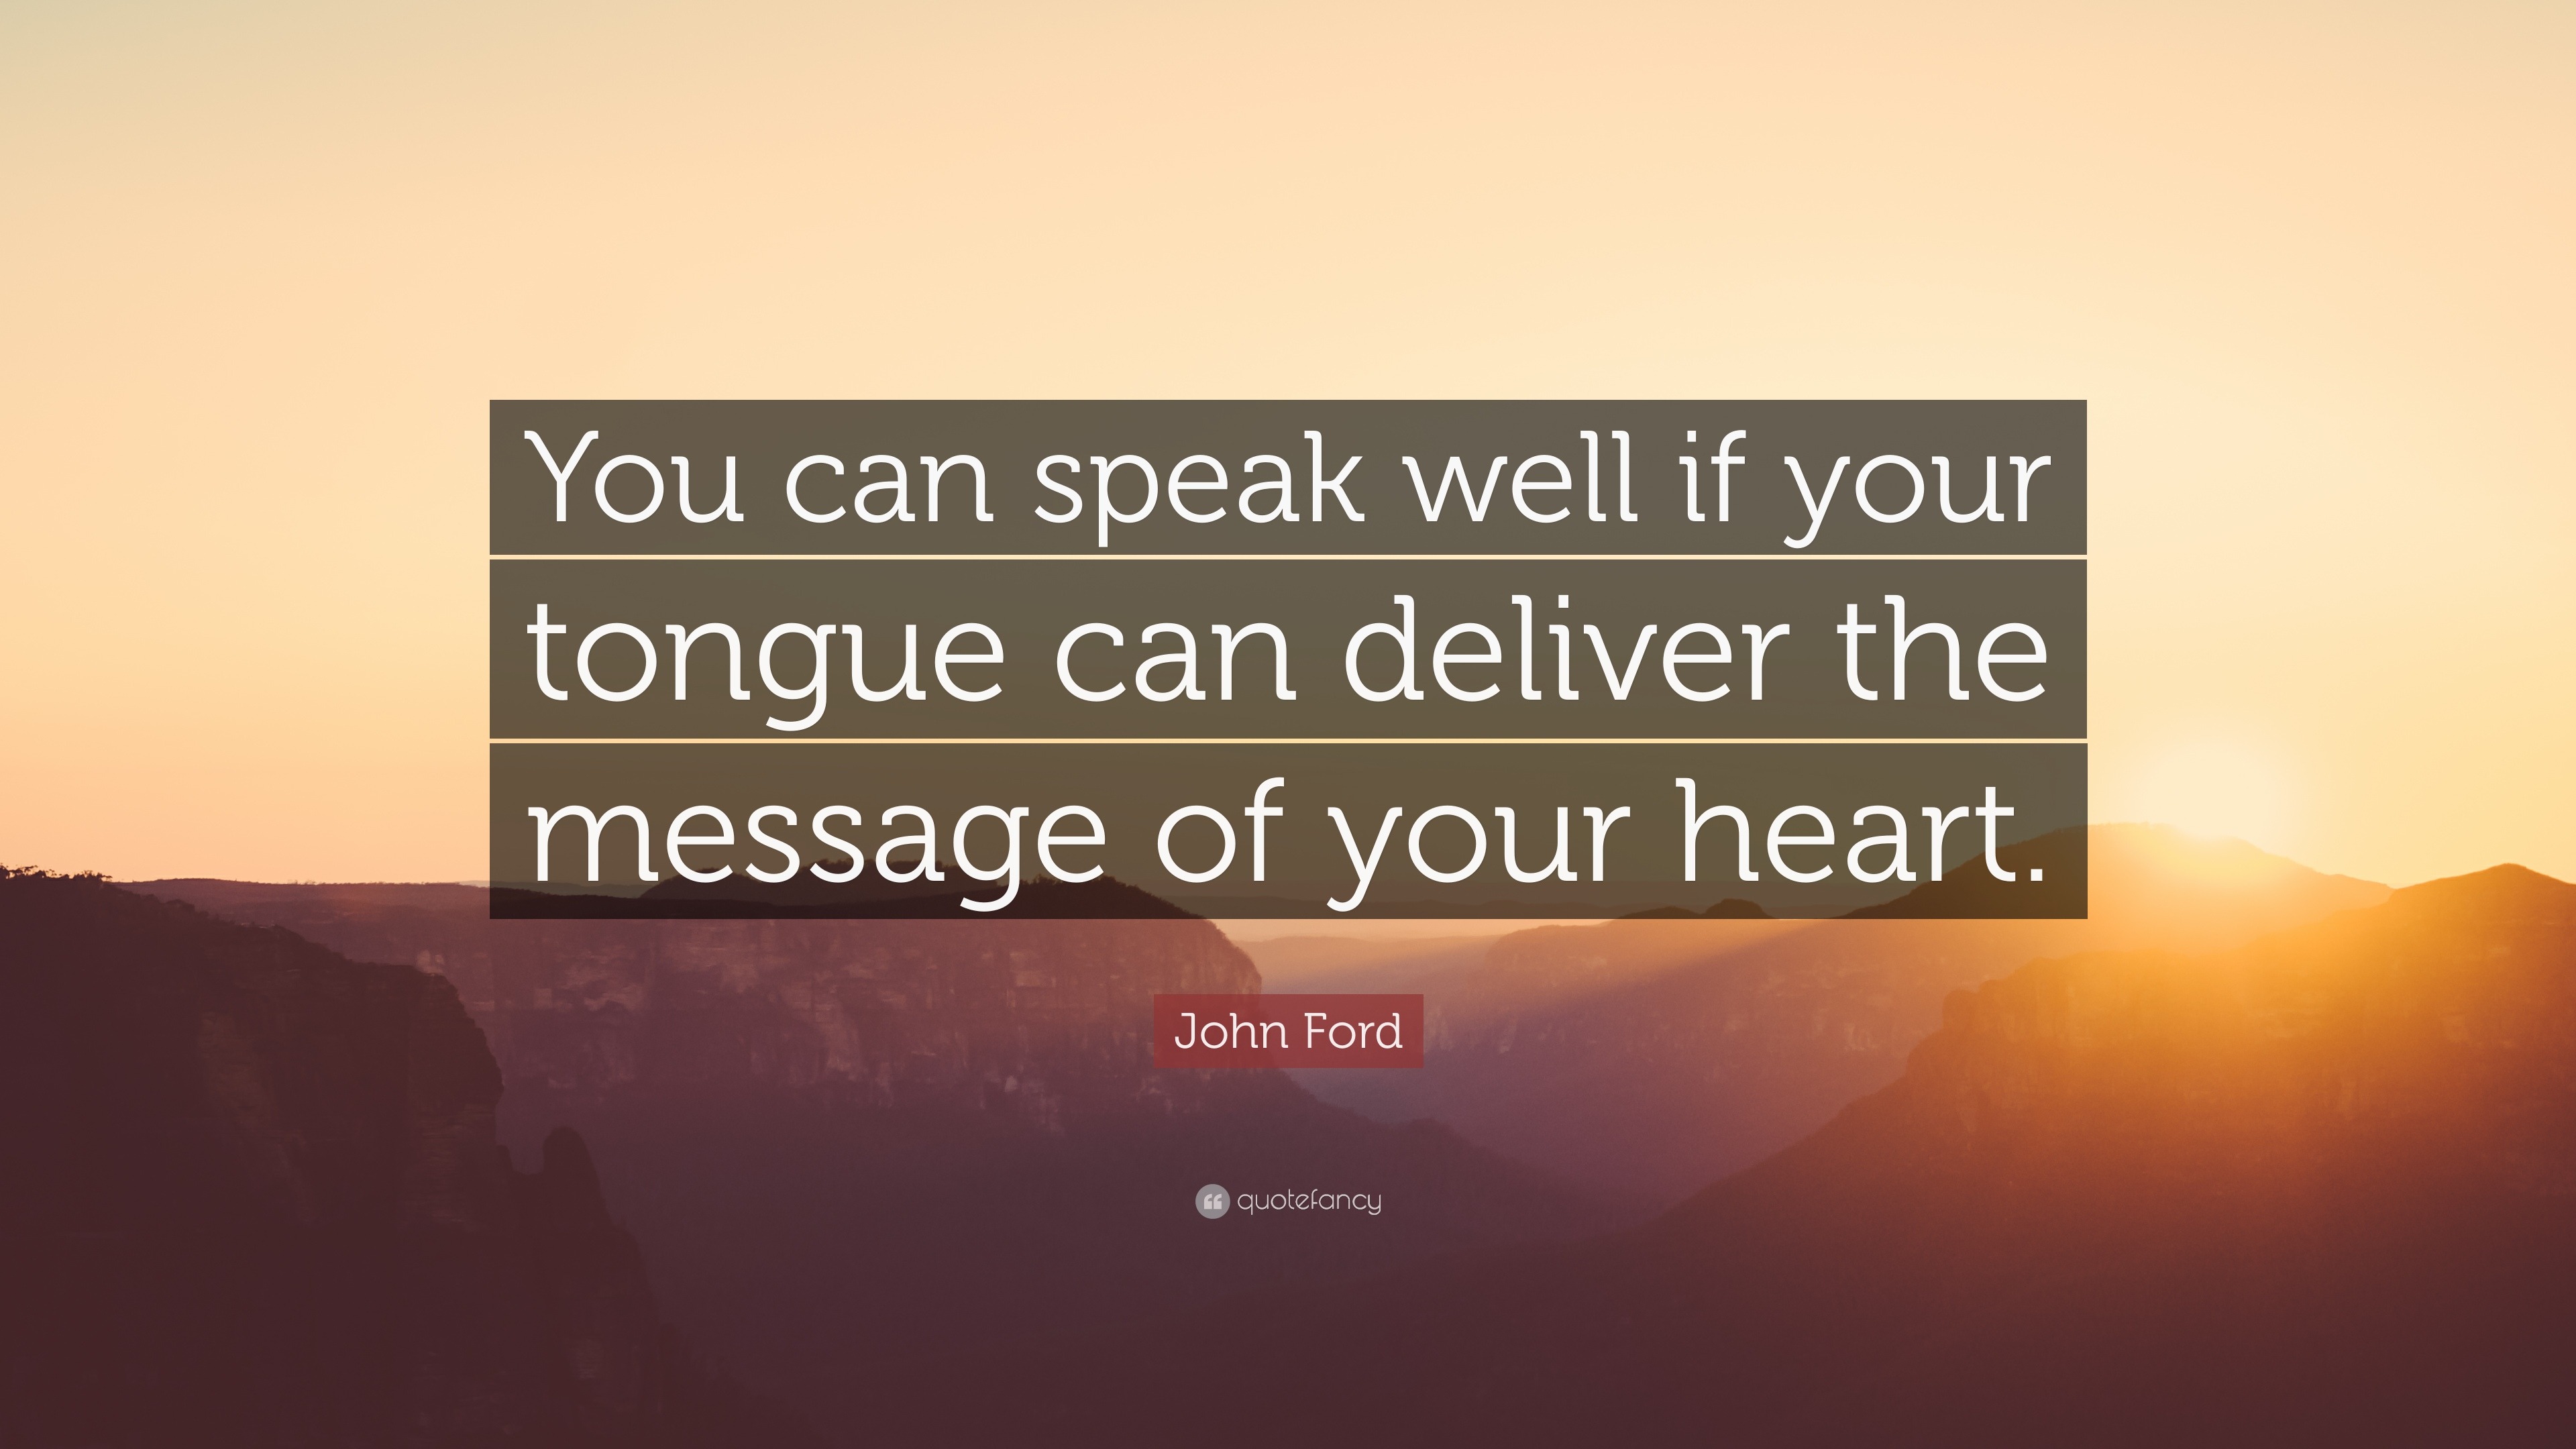 John Ford Quote You Can Speak Well If Your Tongue Can Deliver The Message Of Your